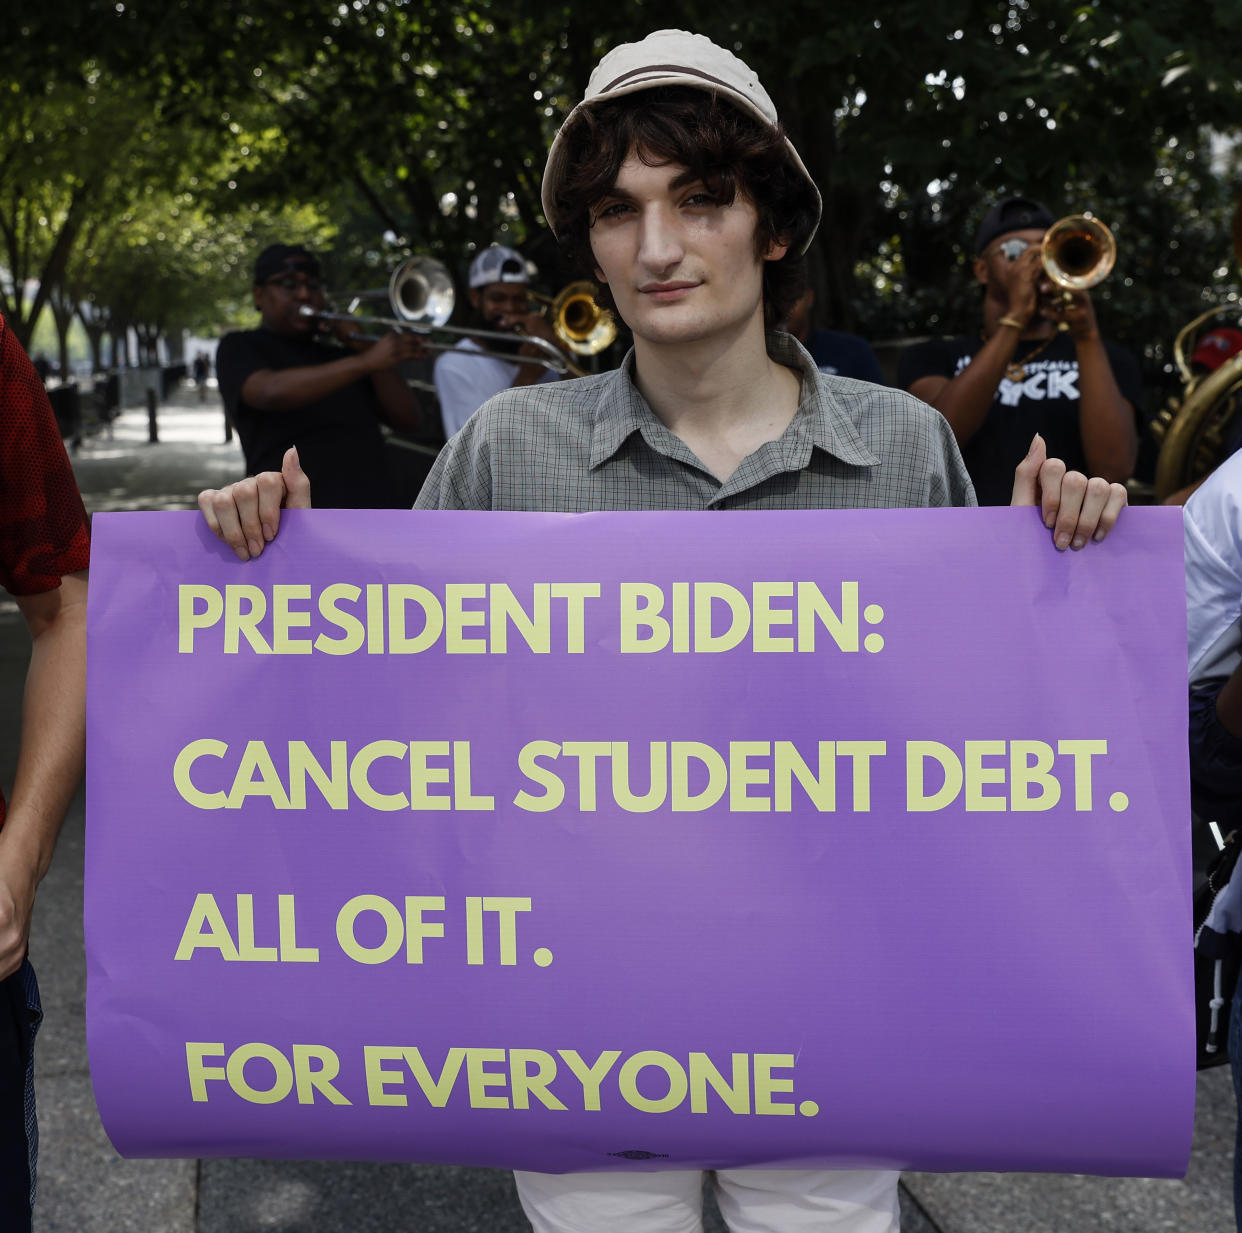 WASHINGTON, DC - JULY 27: Student loan debt holders take part in a demonstration outside of the white house staff entrance to demand that President Biden cancel student loan debt in August on July 27, 2022 at the Executive Offices in Washington, DC. (Photo by Jemal Countess/Getty Images for We, The 45 Million)